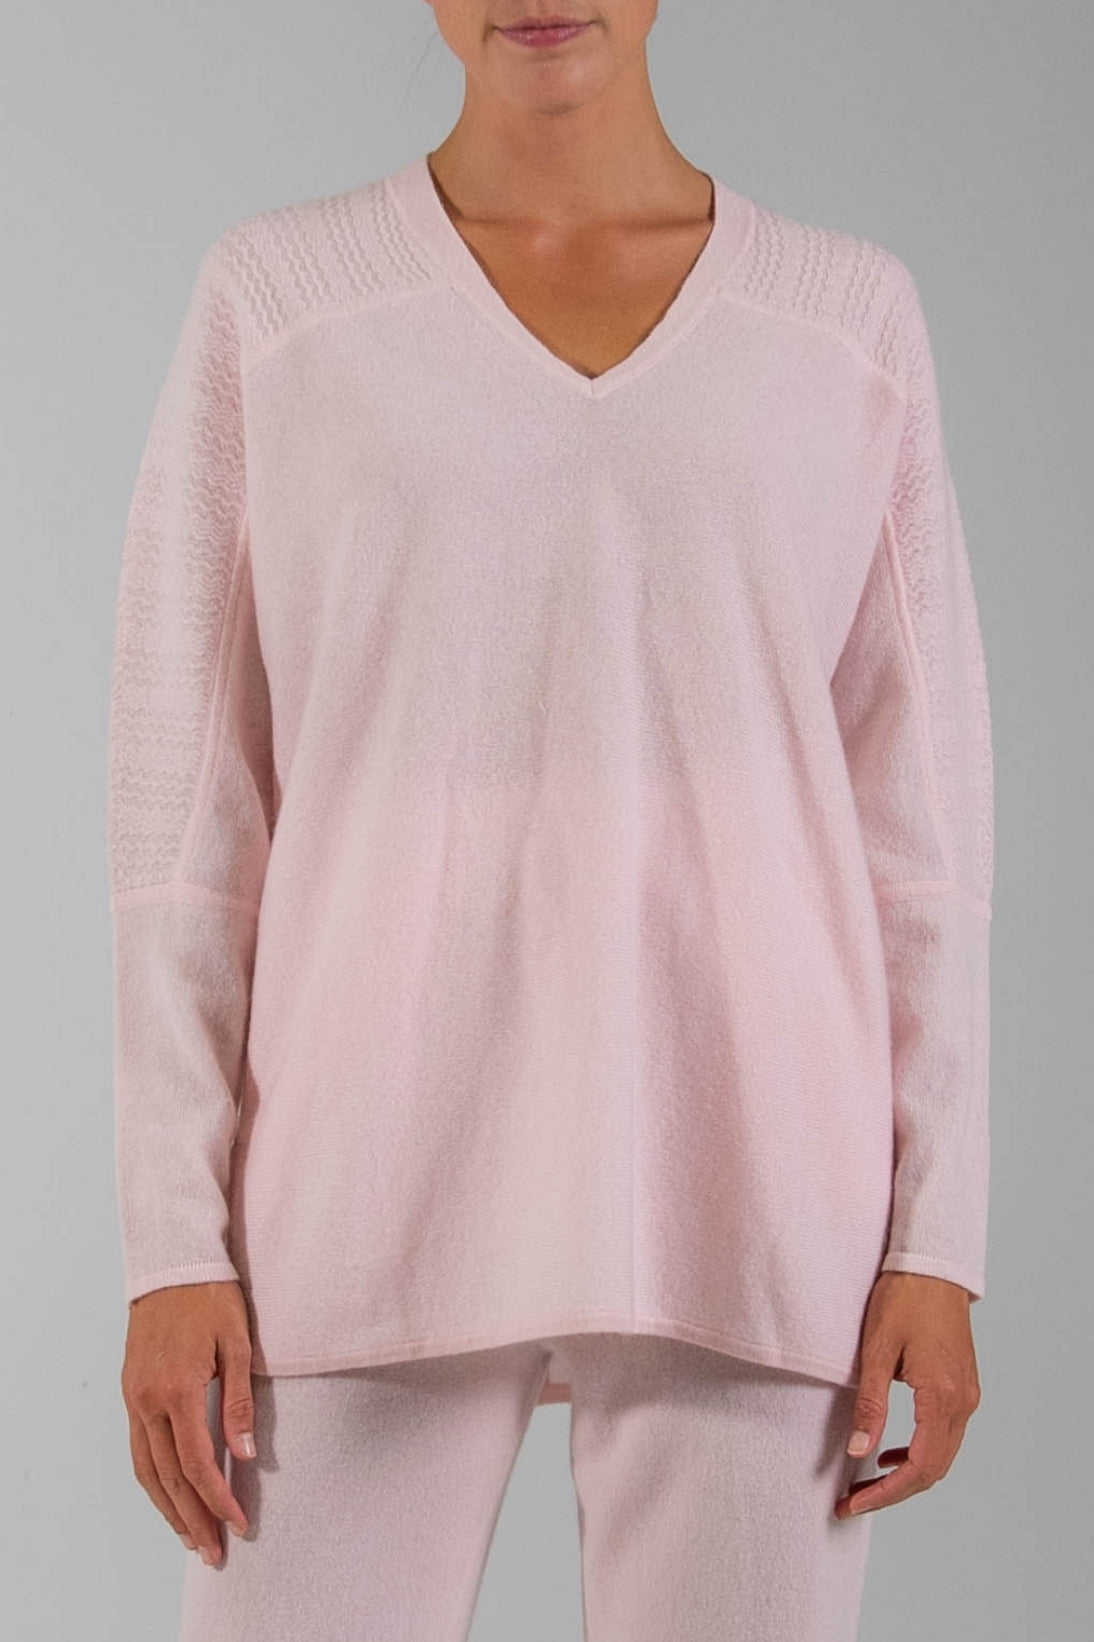 RECYCLED CASHMERE TEXTURED SLEEVE DOLMAN SWEATER